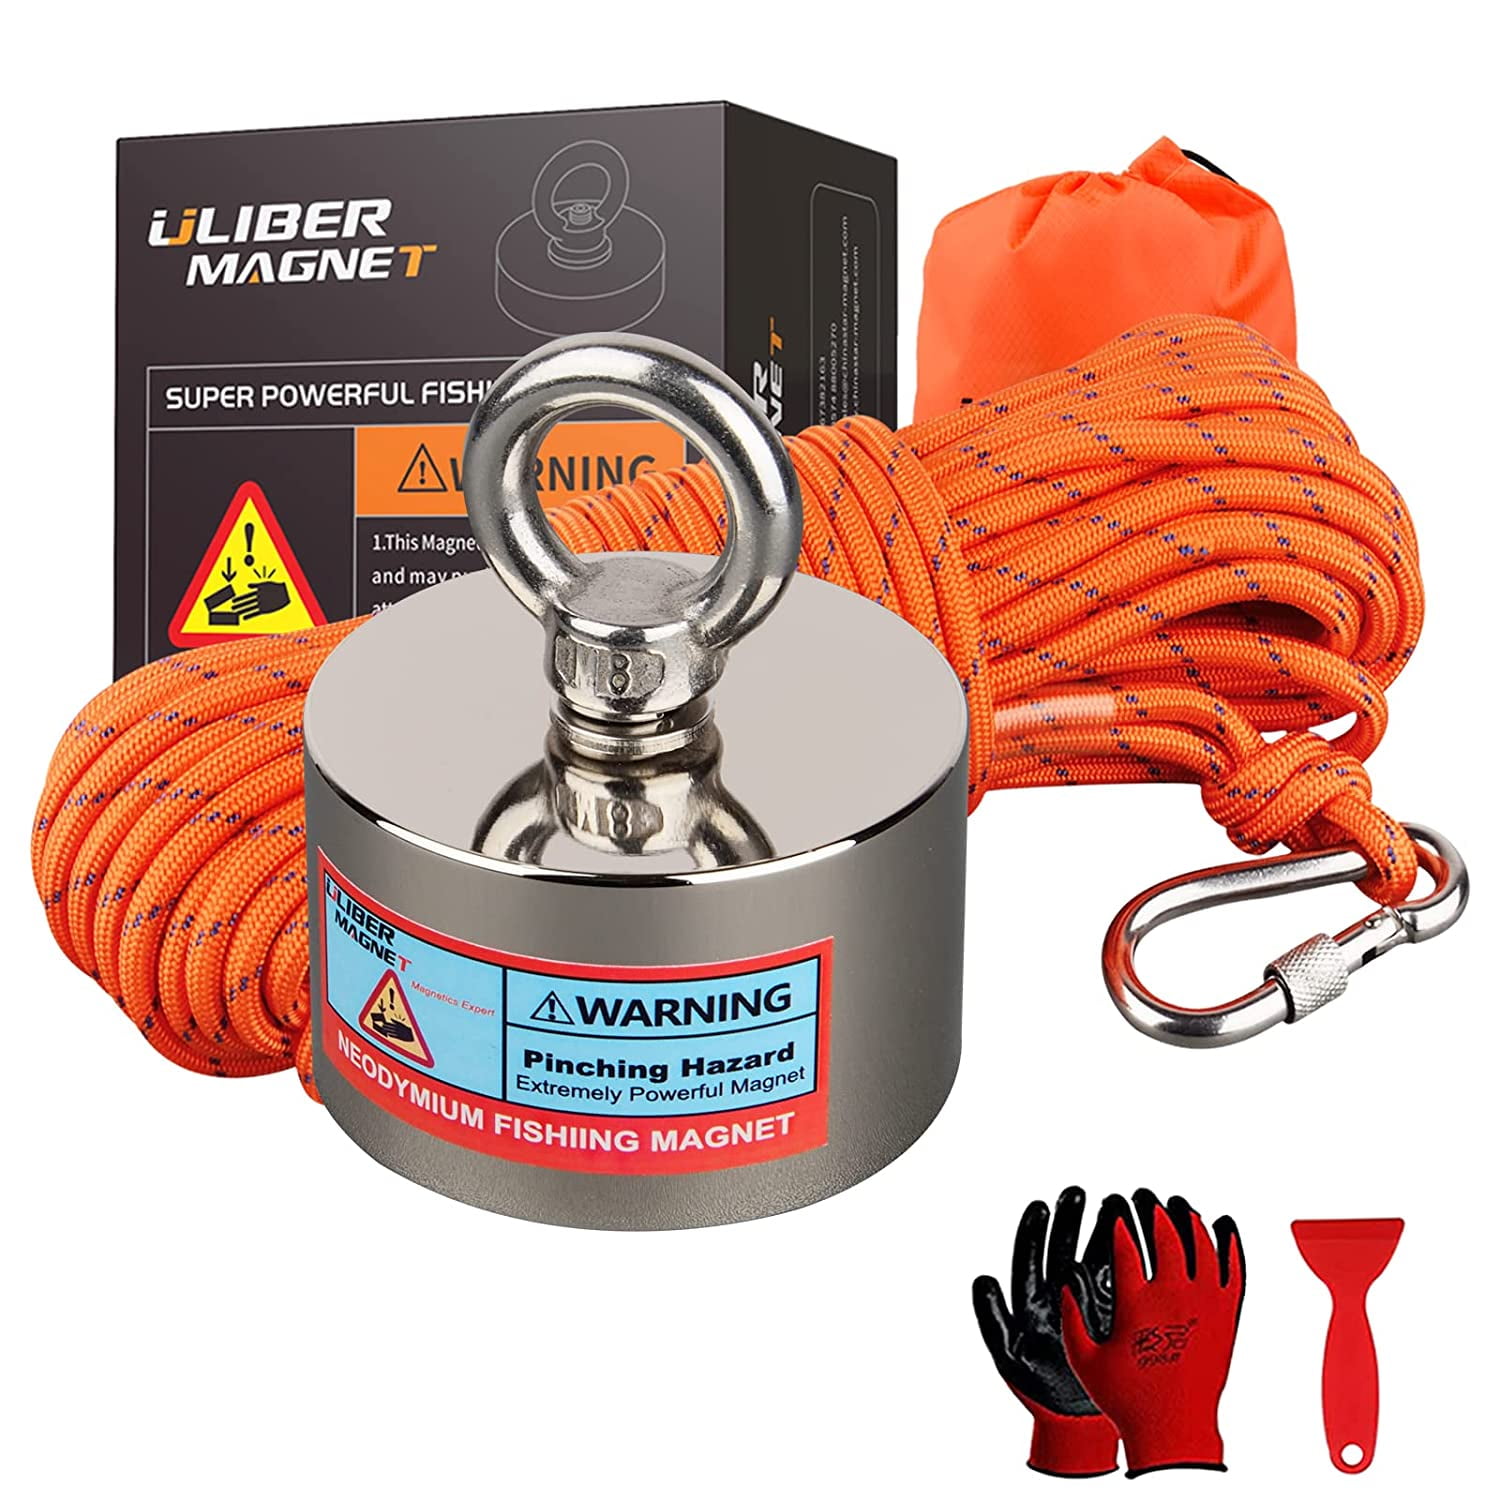 Fishing Magnet Kit - 1000 lbs Fishing Magnet + Rope + Carabiner by HIPPO  MAGNETS